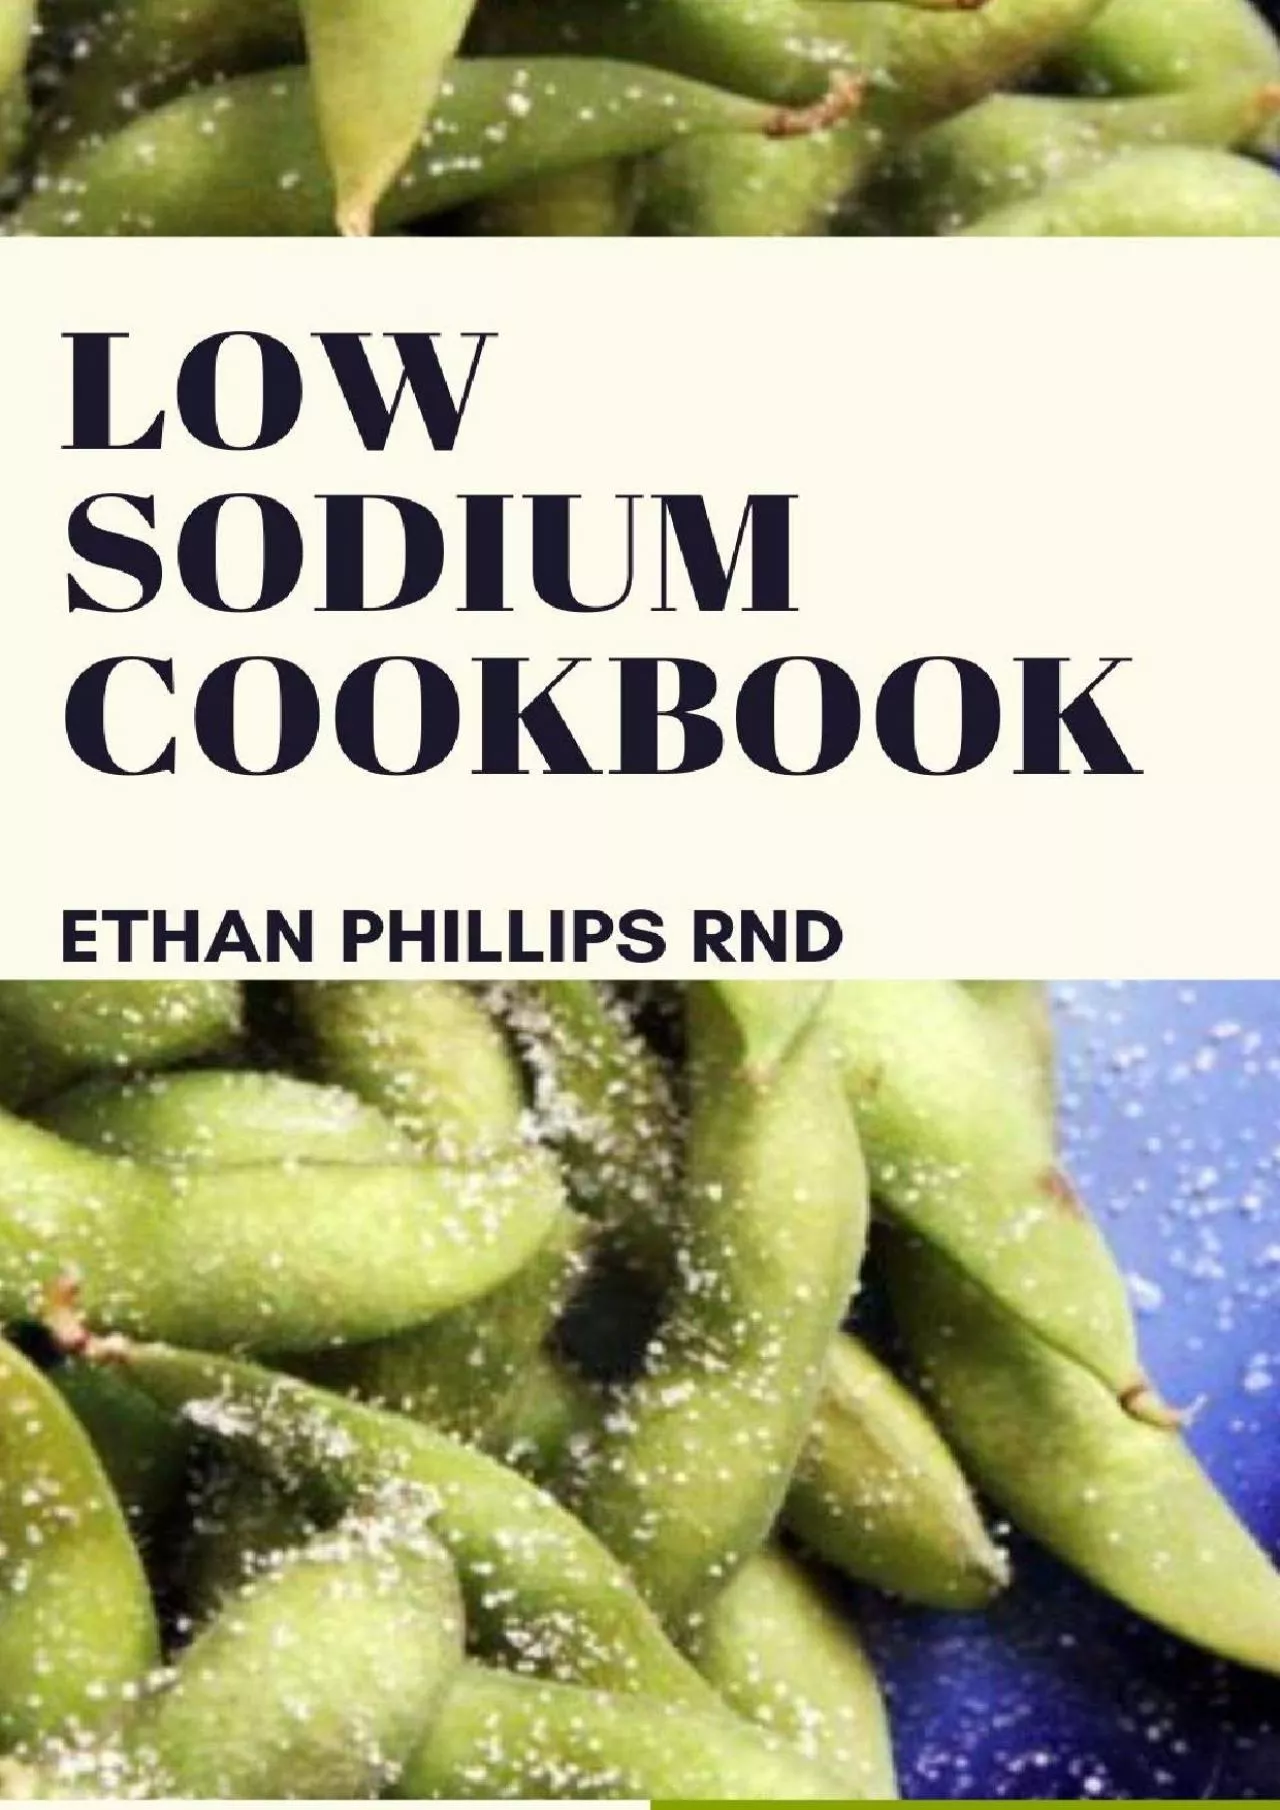 (BOOK)-LOW SODIUM COOKBOOK: The Ultimate Health Friendly and Nutricious Easy to Make Low